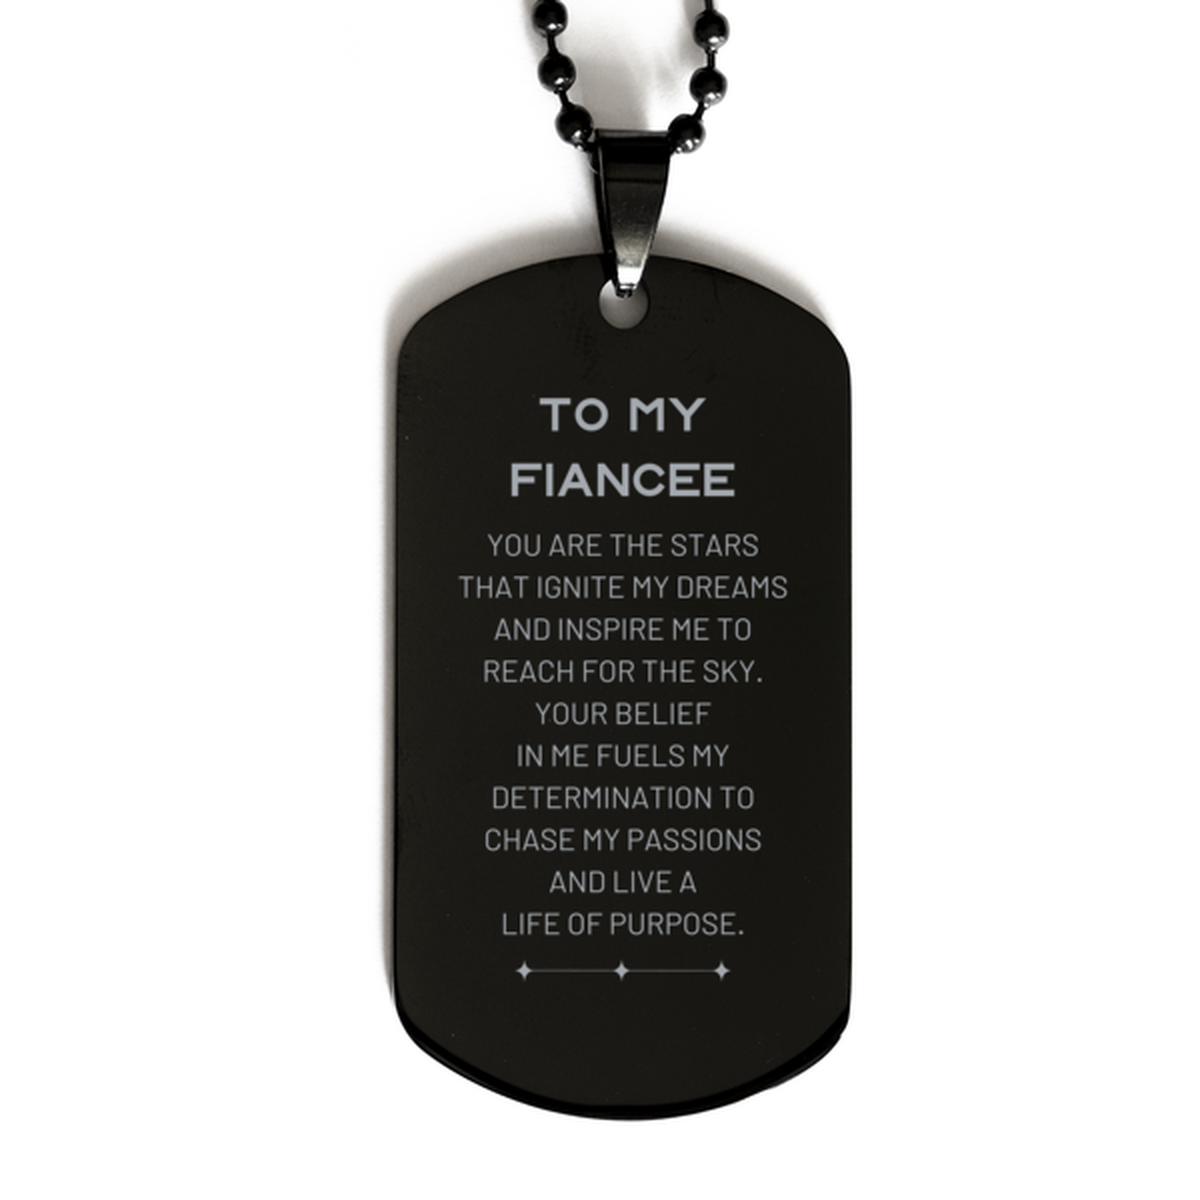 To My Fiancee Black Dog Tag, You are the stars that ignite my dreams and inspire me to reach for the sky, Birthday Unique Gifts For Fiancee, Thank You Gifts For Fiancee